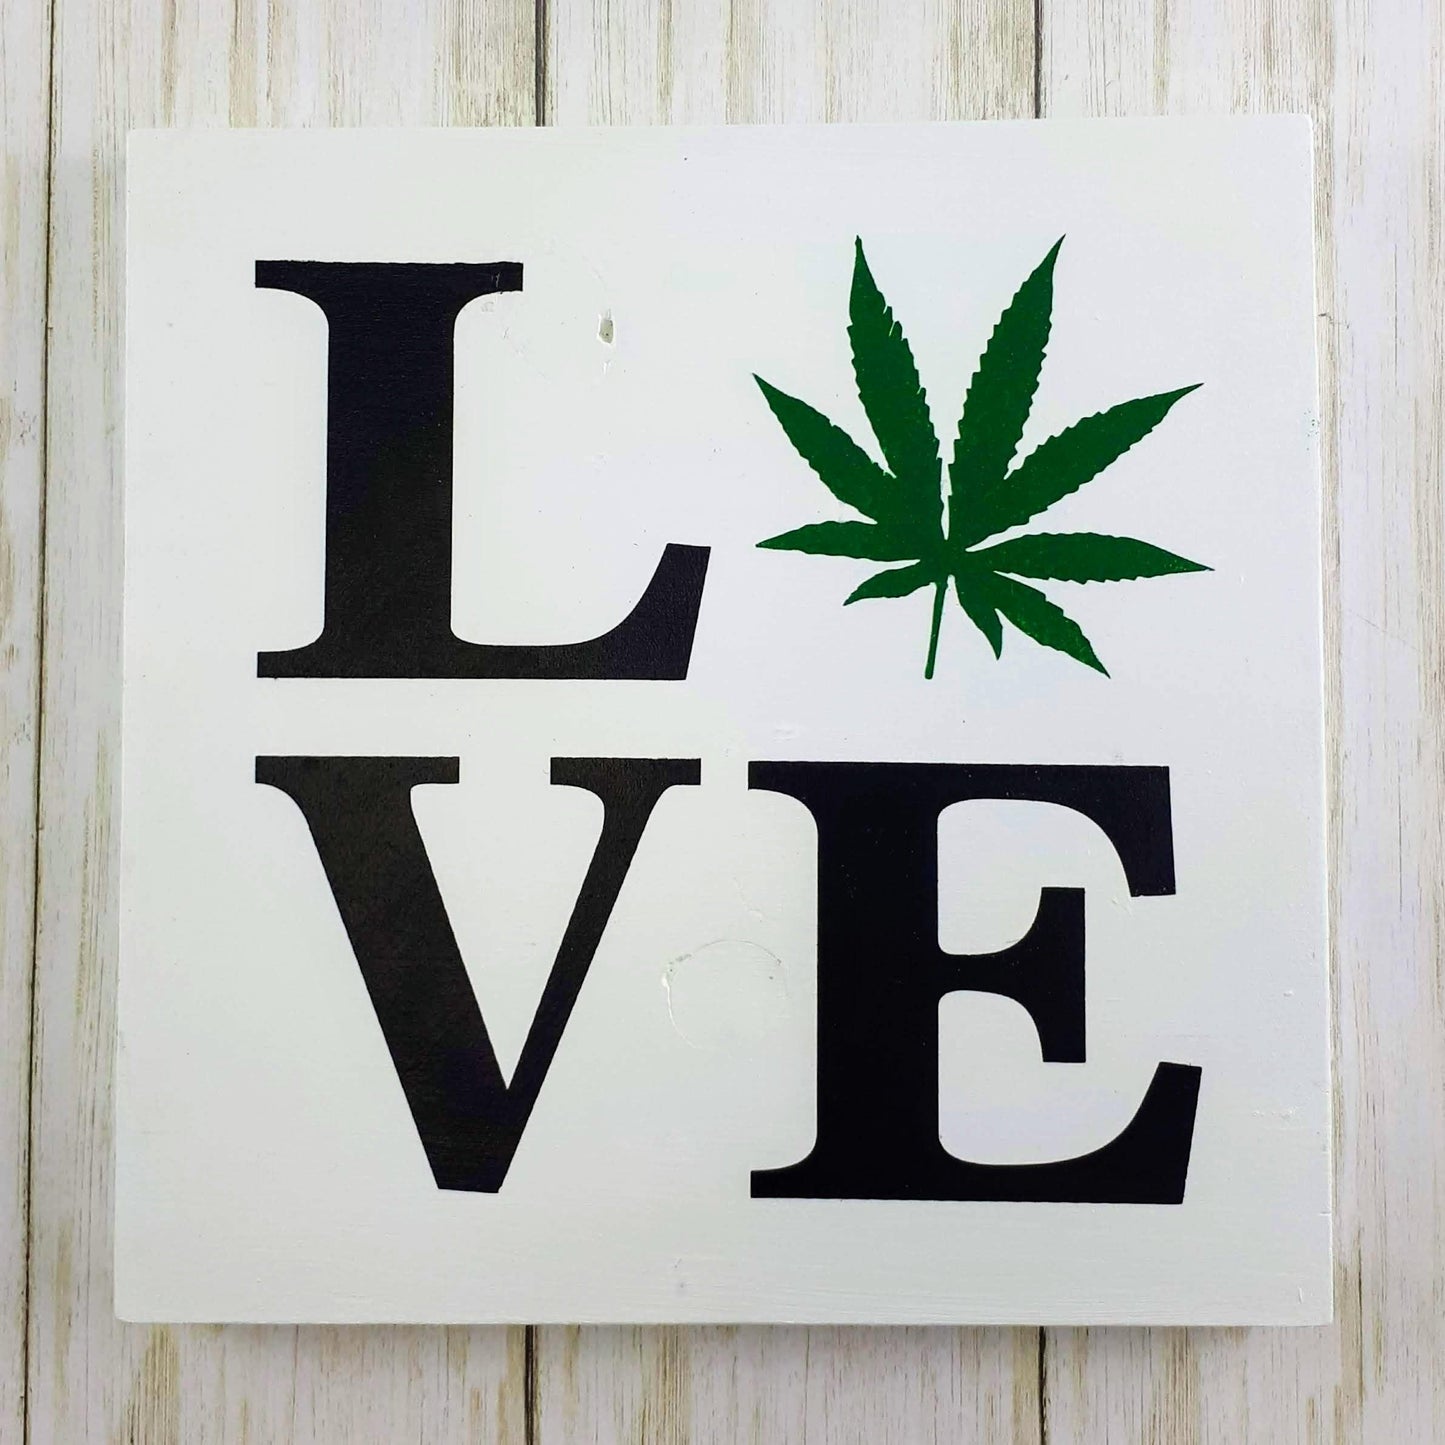 Square Love Cannabis Leaf Wood Sign with white background